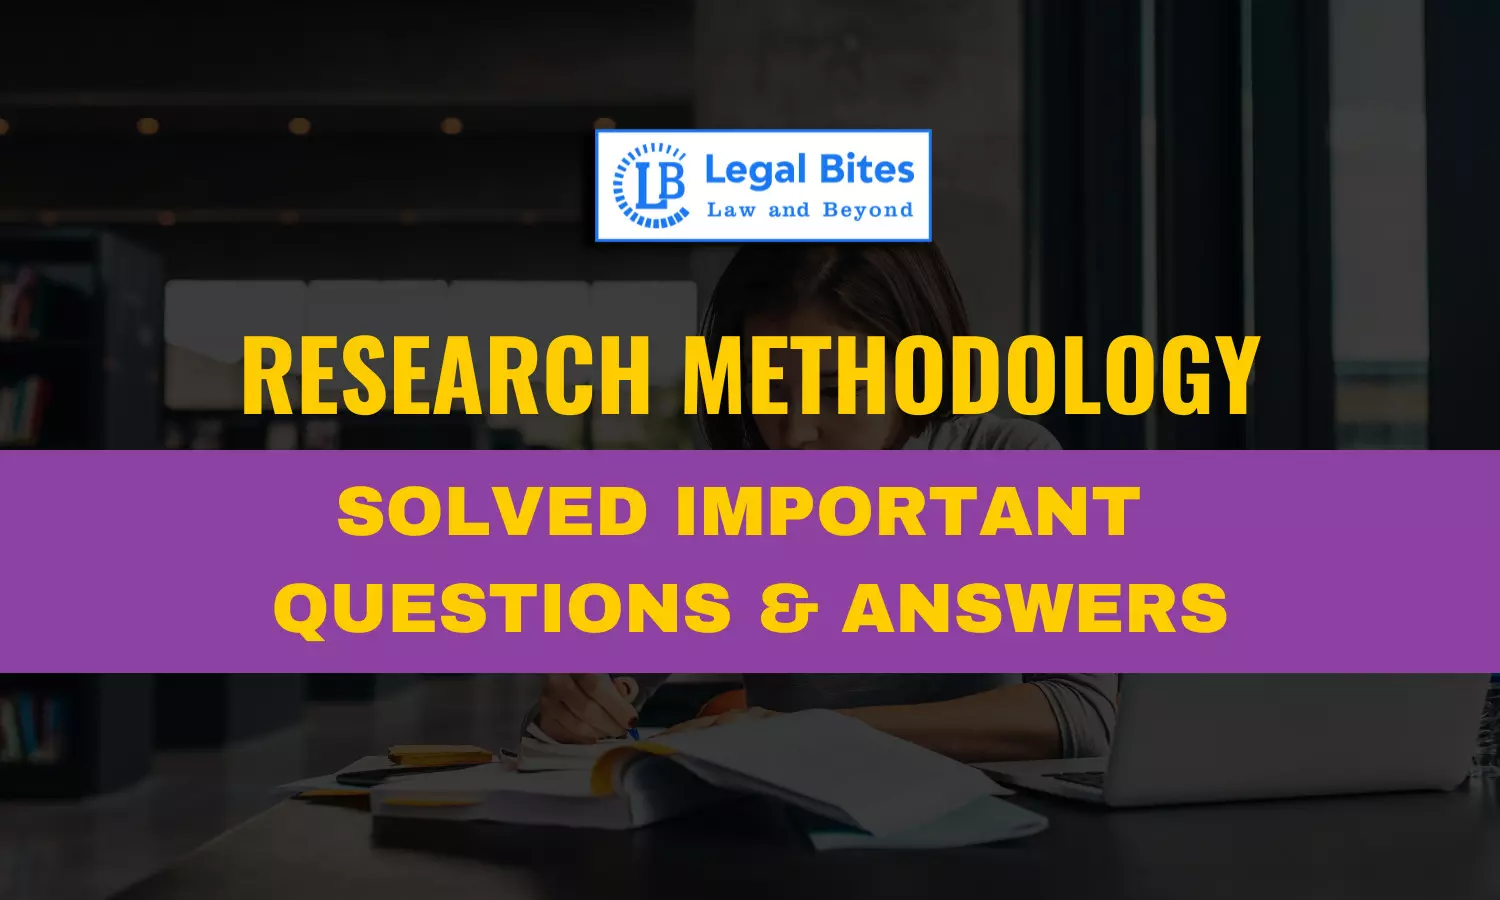 Write a critical note on the use of deductive and inductive methods in legal research.